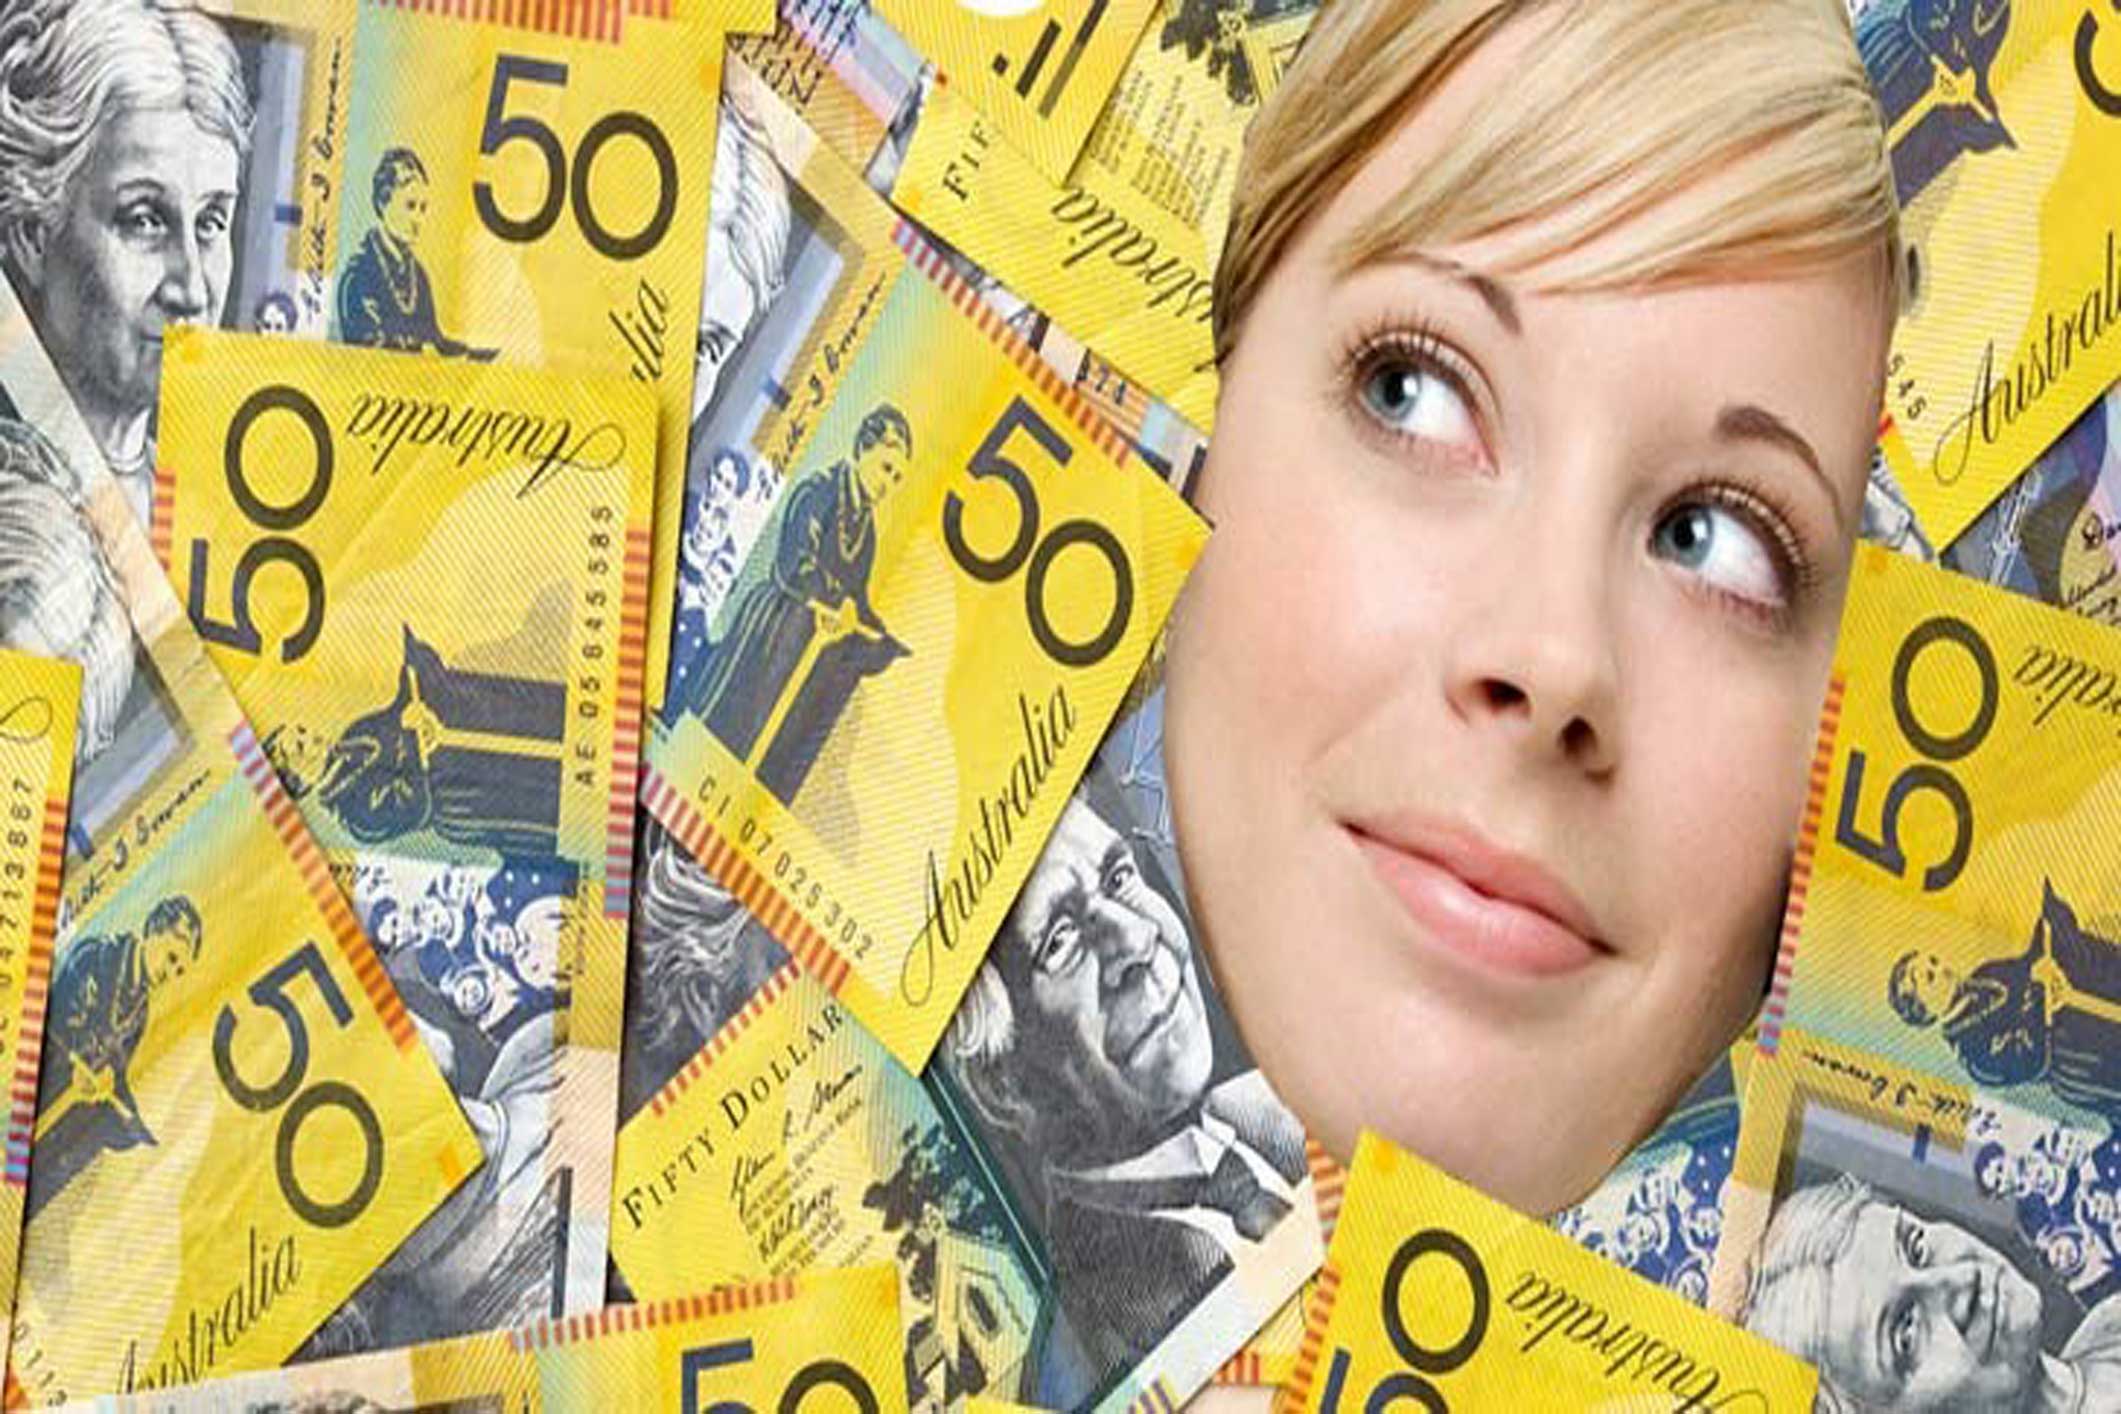 A young woman's face surrounded by fifty dollar notes